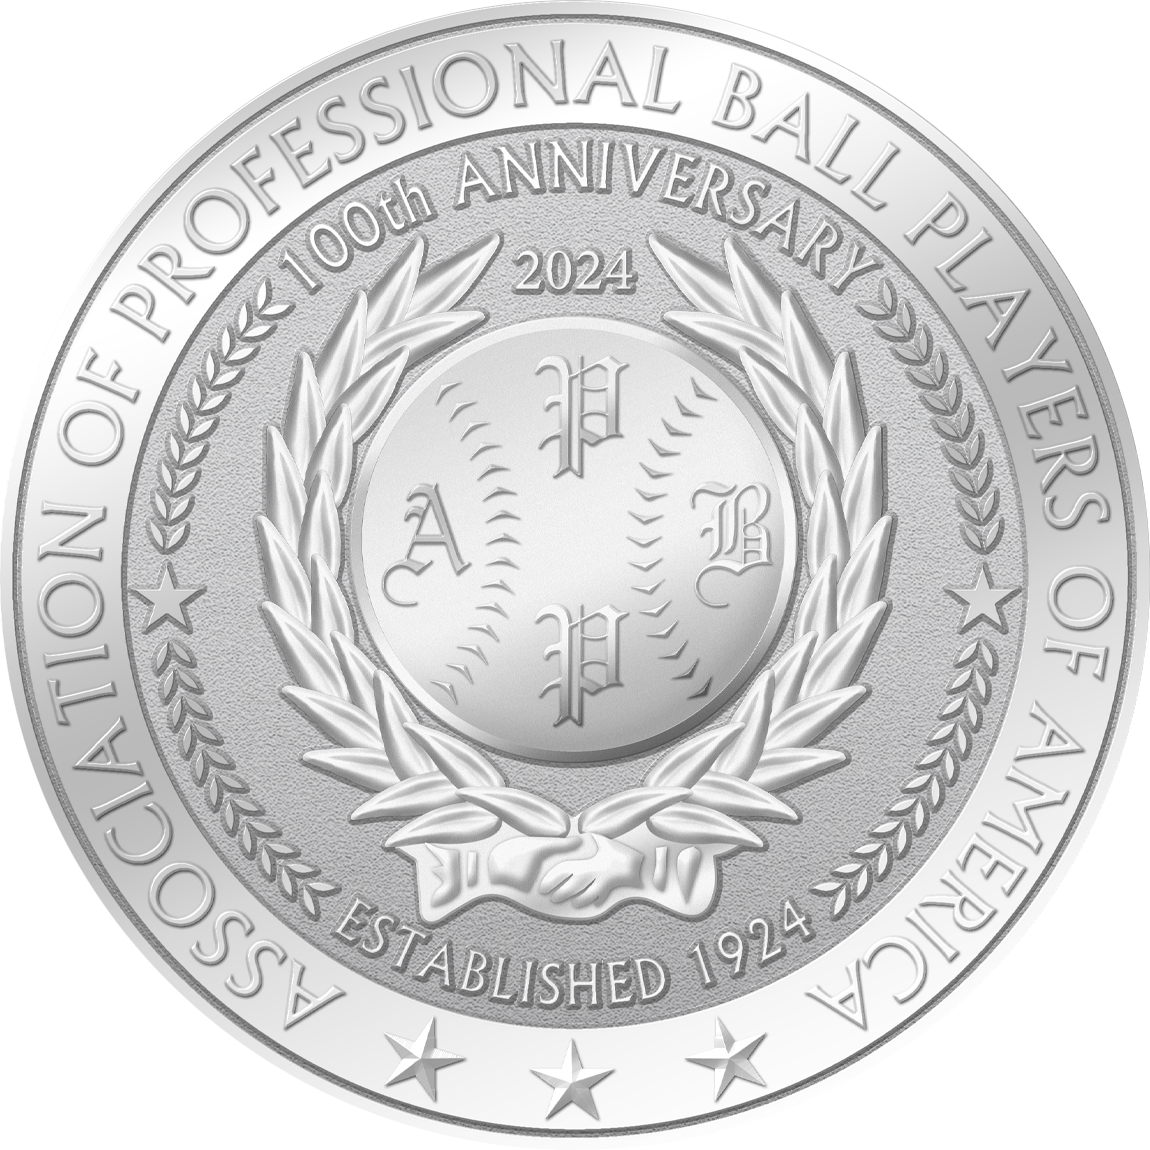 The Association of Professional Ball Players of America Collector’s Edition 100th Anniversary Coin Back